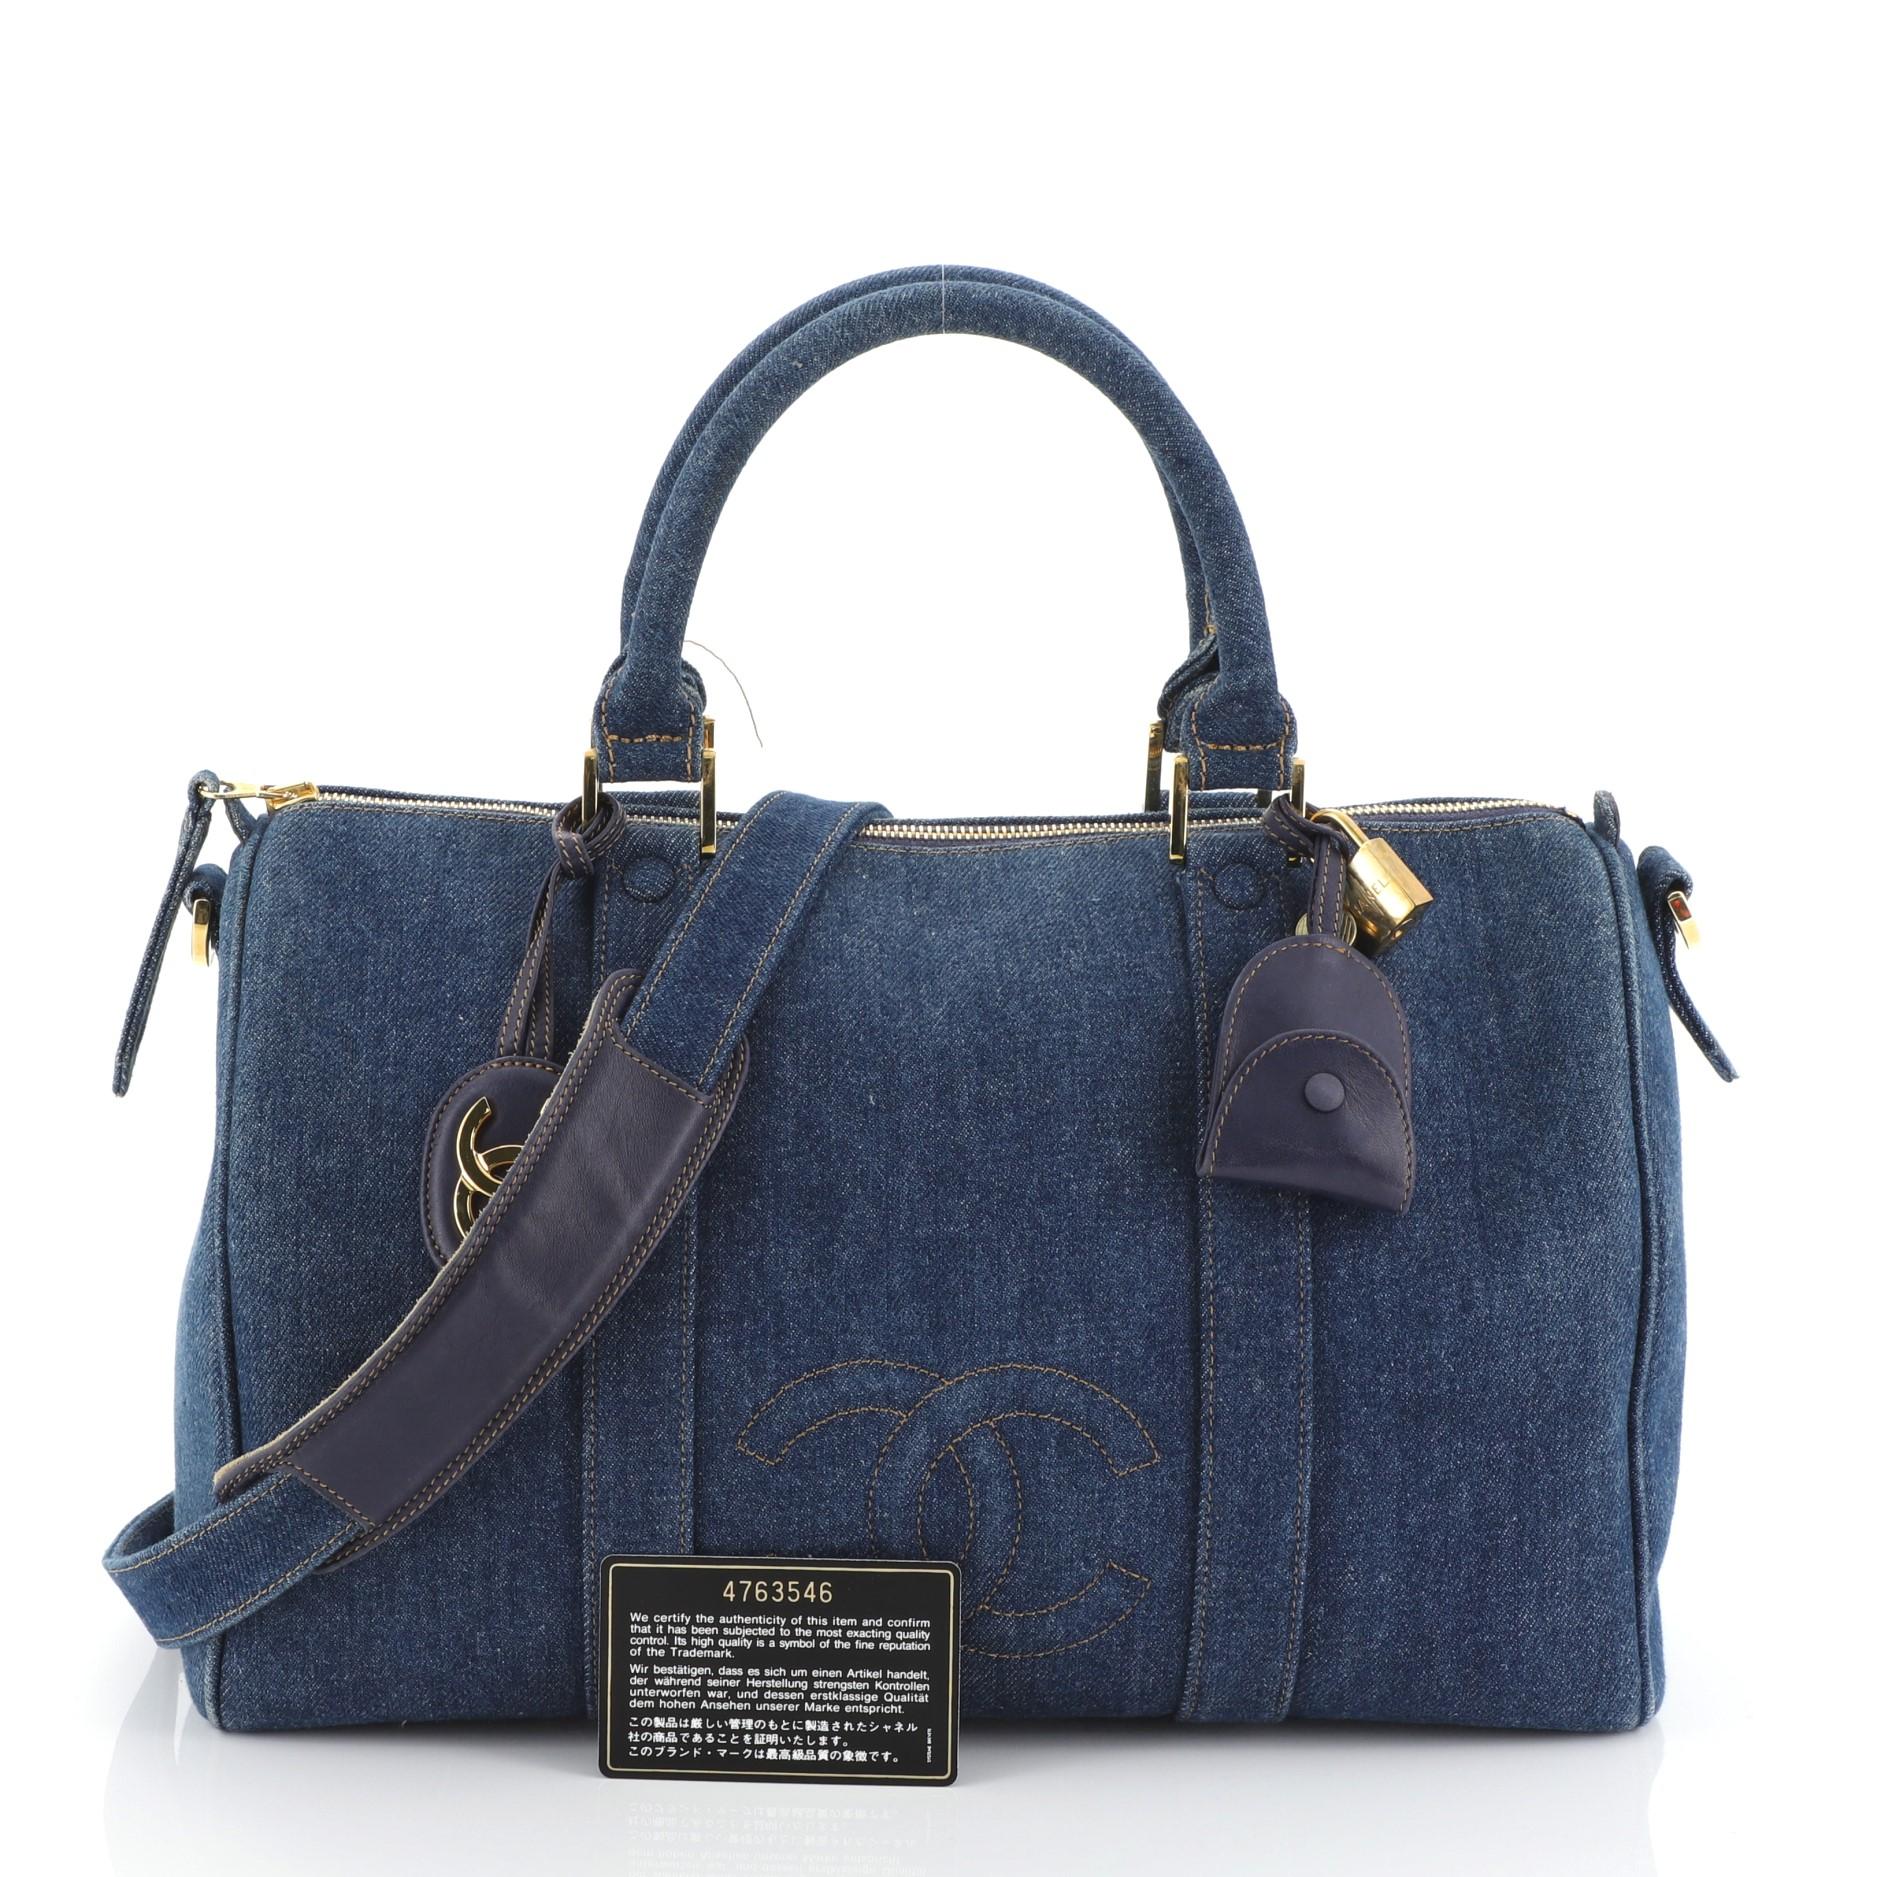 This Chanel Vintage CC Boston Bag Denim Medium, crafted in blue denim, features dual rolled leather handles and gold-tone hardware. Its zip closure opens to a black fabric interior with zip pocket. Hologram sticker reads: 4763546. 

Condition: Very